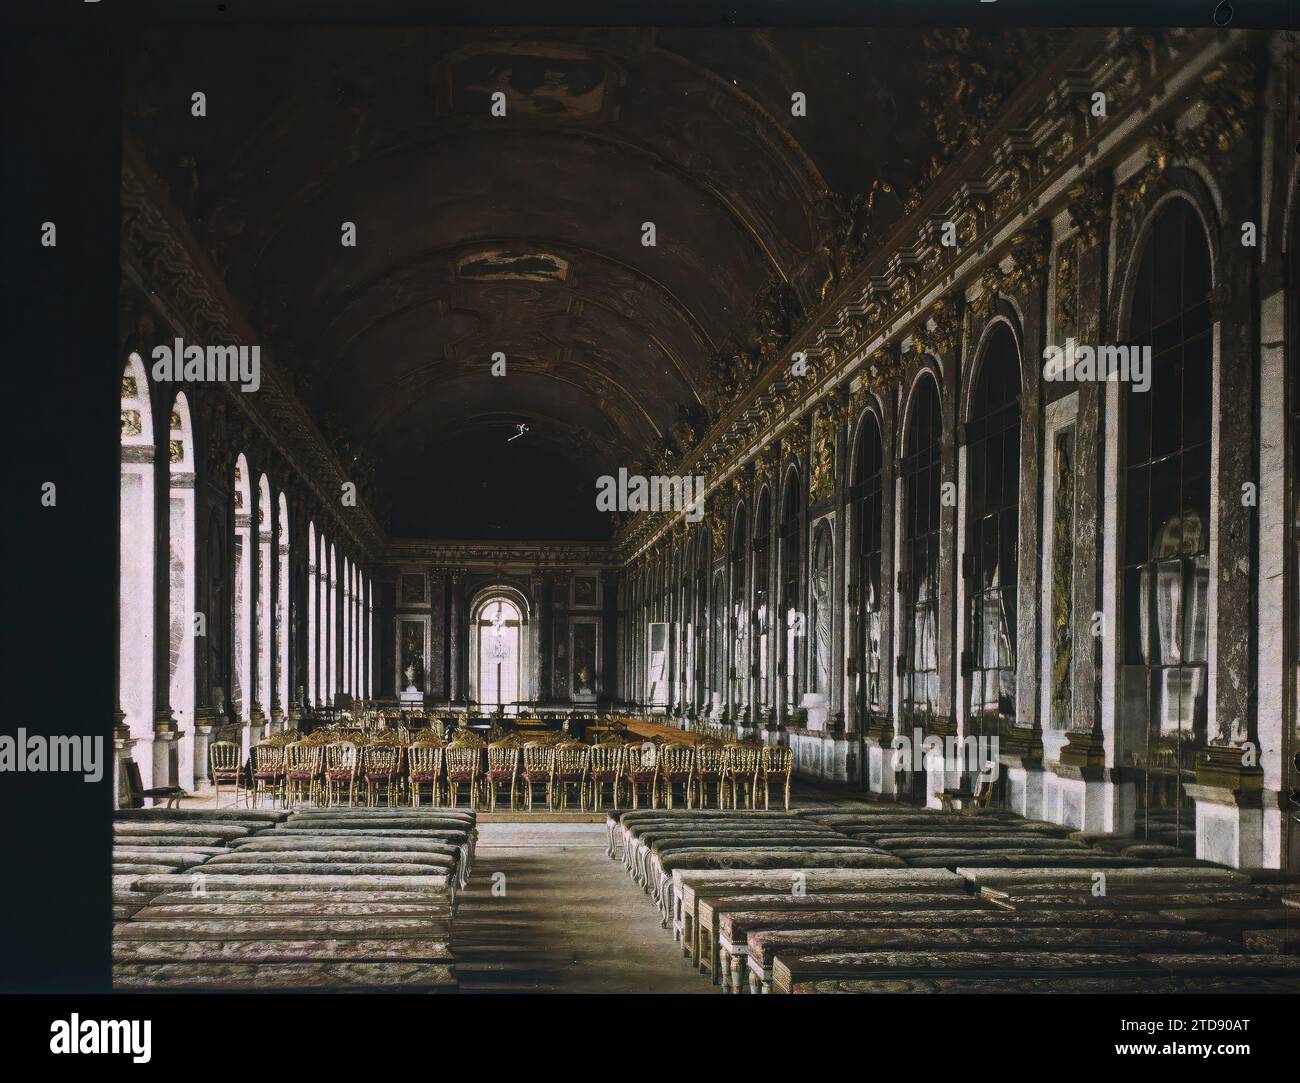 Palace of Versailles, France, Habitat, Architecture, Art, International relations, First World War, King, Queen, Interior view, Decorative arts, Diplomacy, Peace, Treaties, Palace, Castle, Treaty of Versailles, France, Versailles, The Gallery of Ice cream: at the Palace of Versailles, the day after the signing of Peace, June 30, 1919, Versailles, 30/06/1919 - 30/06/1919, Cuville, Fernand, 1919 - Versailles - Fernand Cuville, Autochrome, photo, Glass, Autochrome, photo, Positive Stock Photo